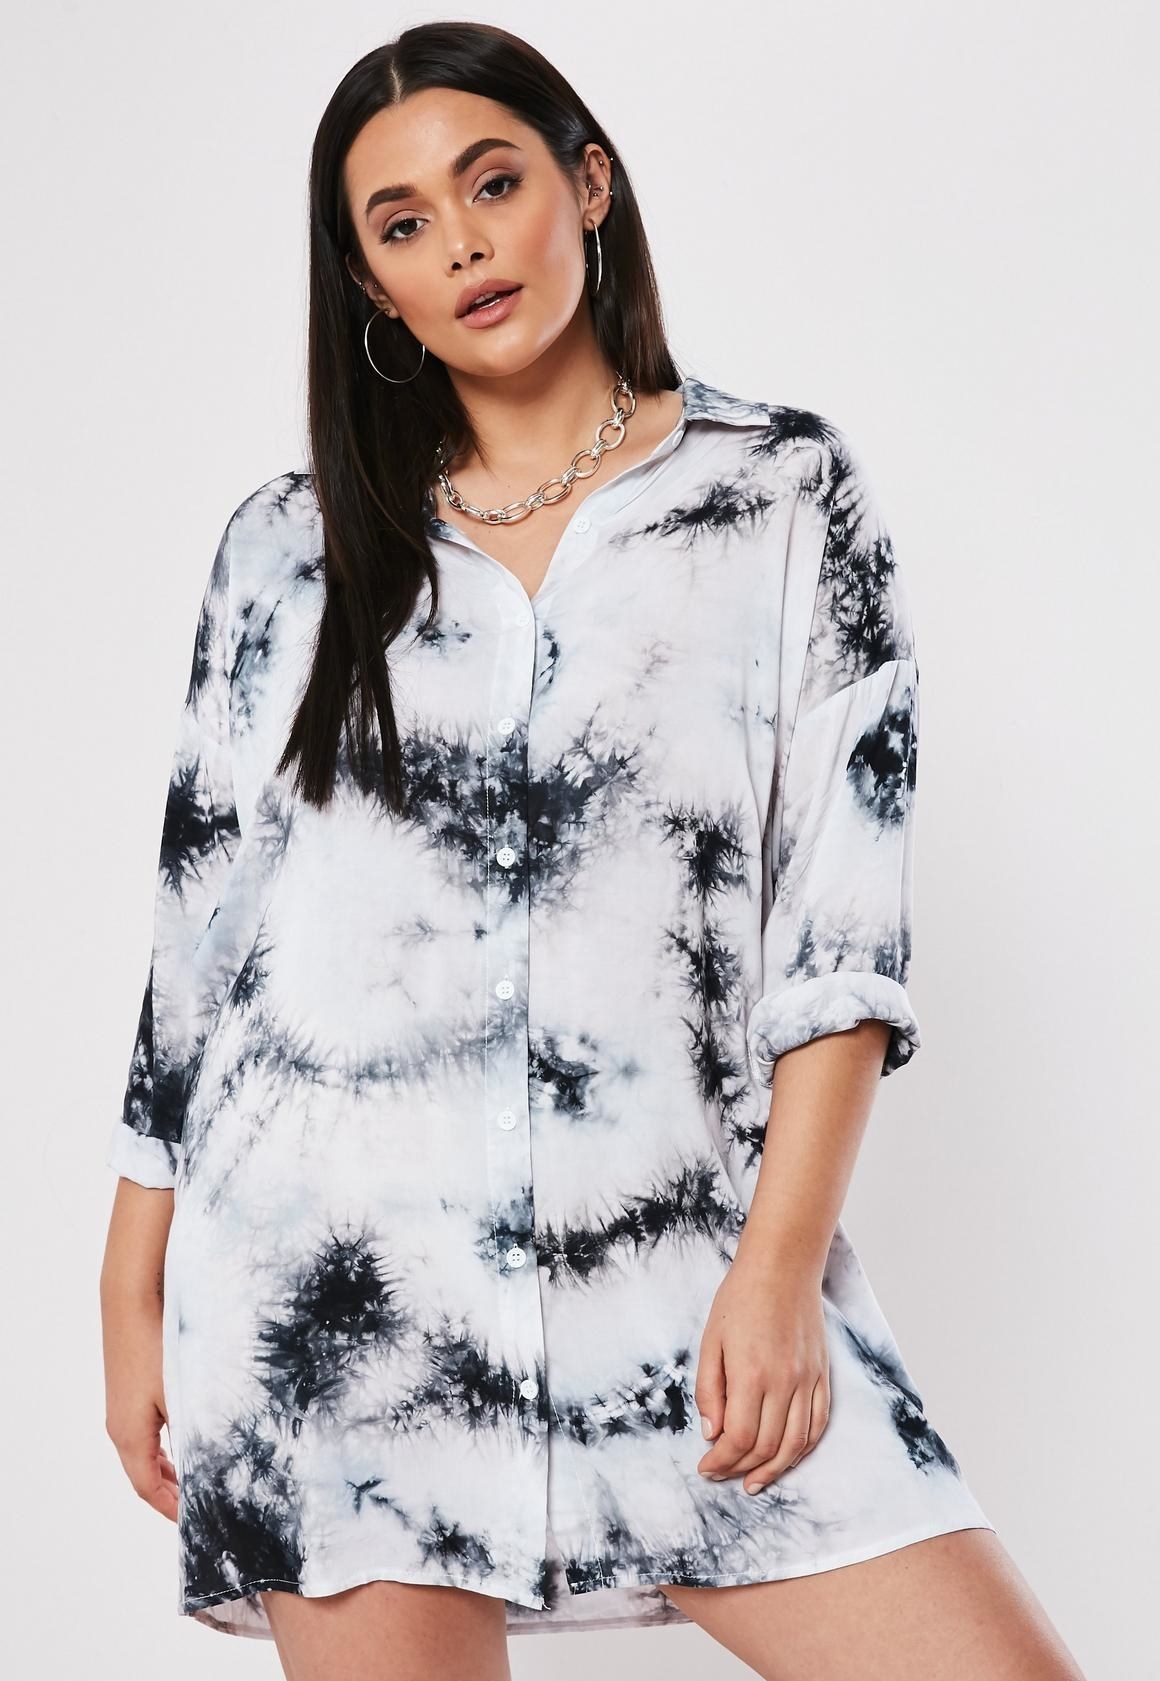 Everything At Missguided Is 50% Off And You're The First To Know About It